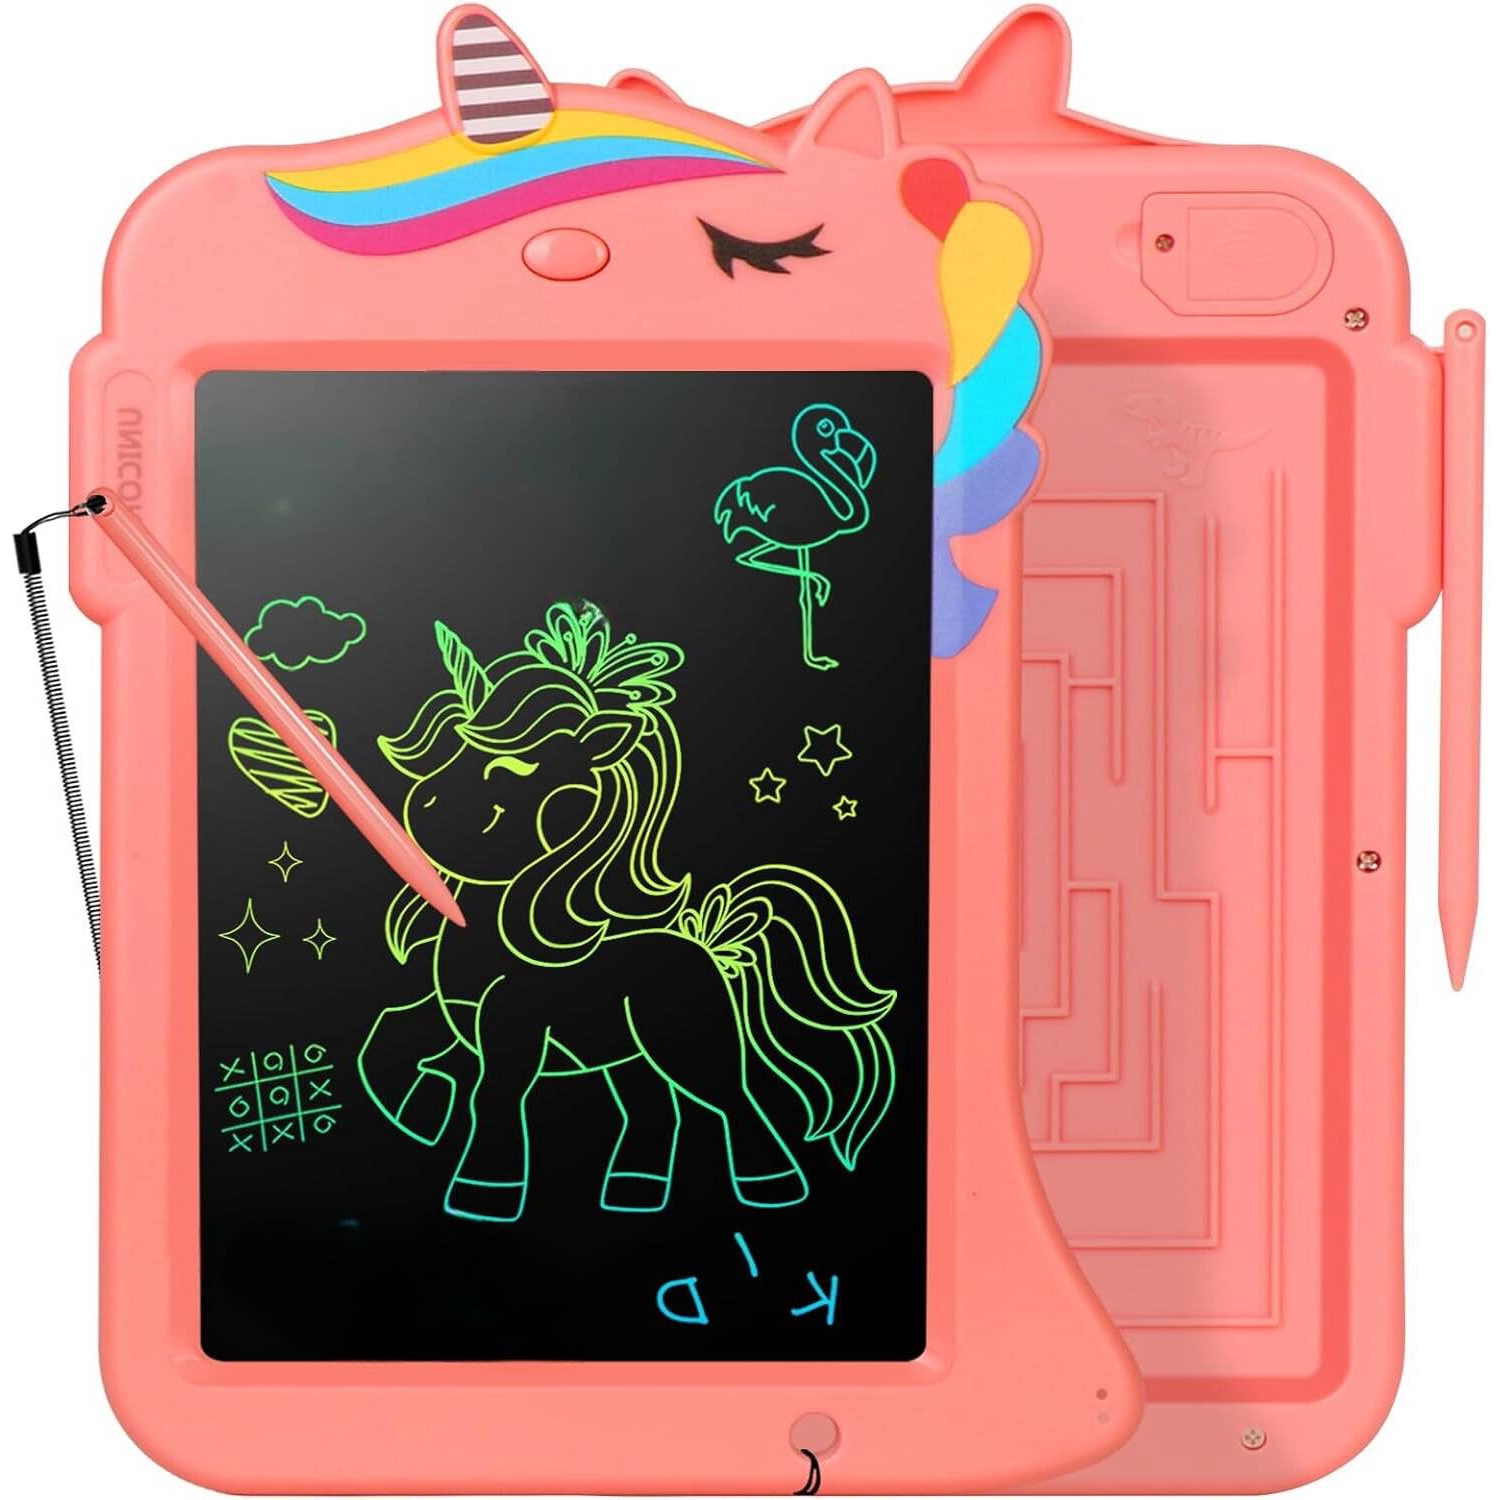 LCD Drawing Writing Tablet, Drawing Pad for Kids Toddlers Drawing Toy Educational Learning Toys Birthday Gift for 2 -8 Year Old Kids, Pink